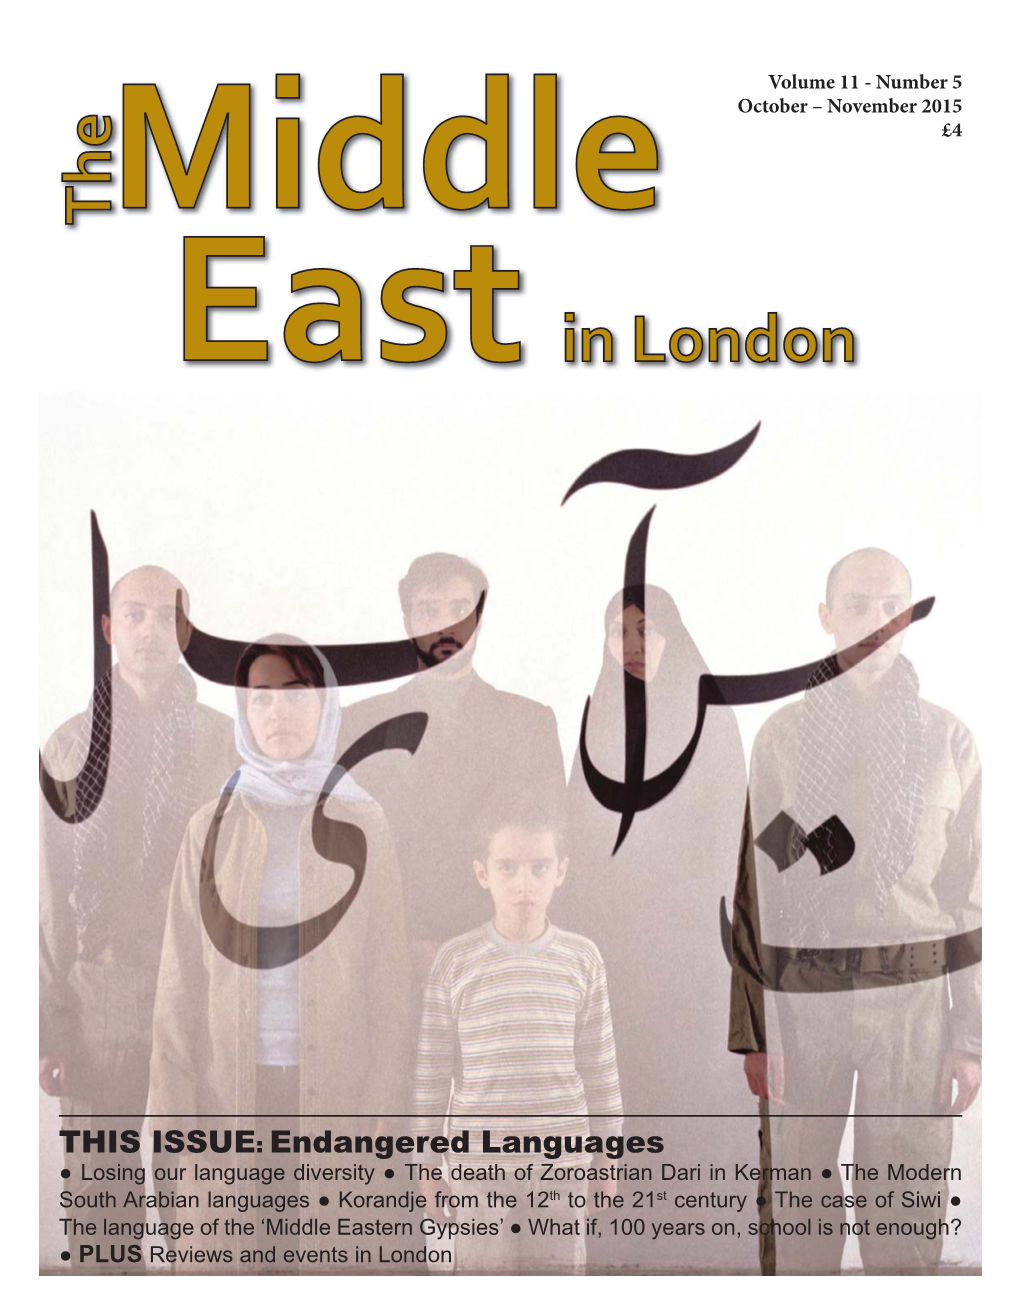 THIS ISSUE: Endangered Languages